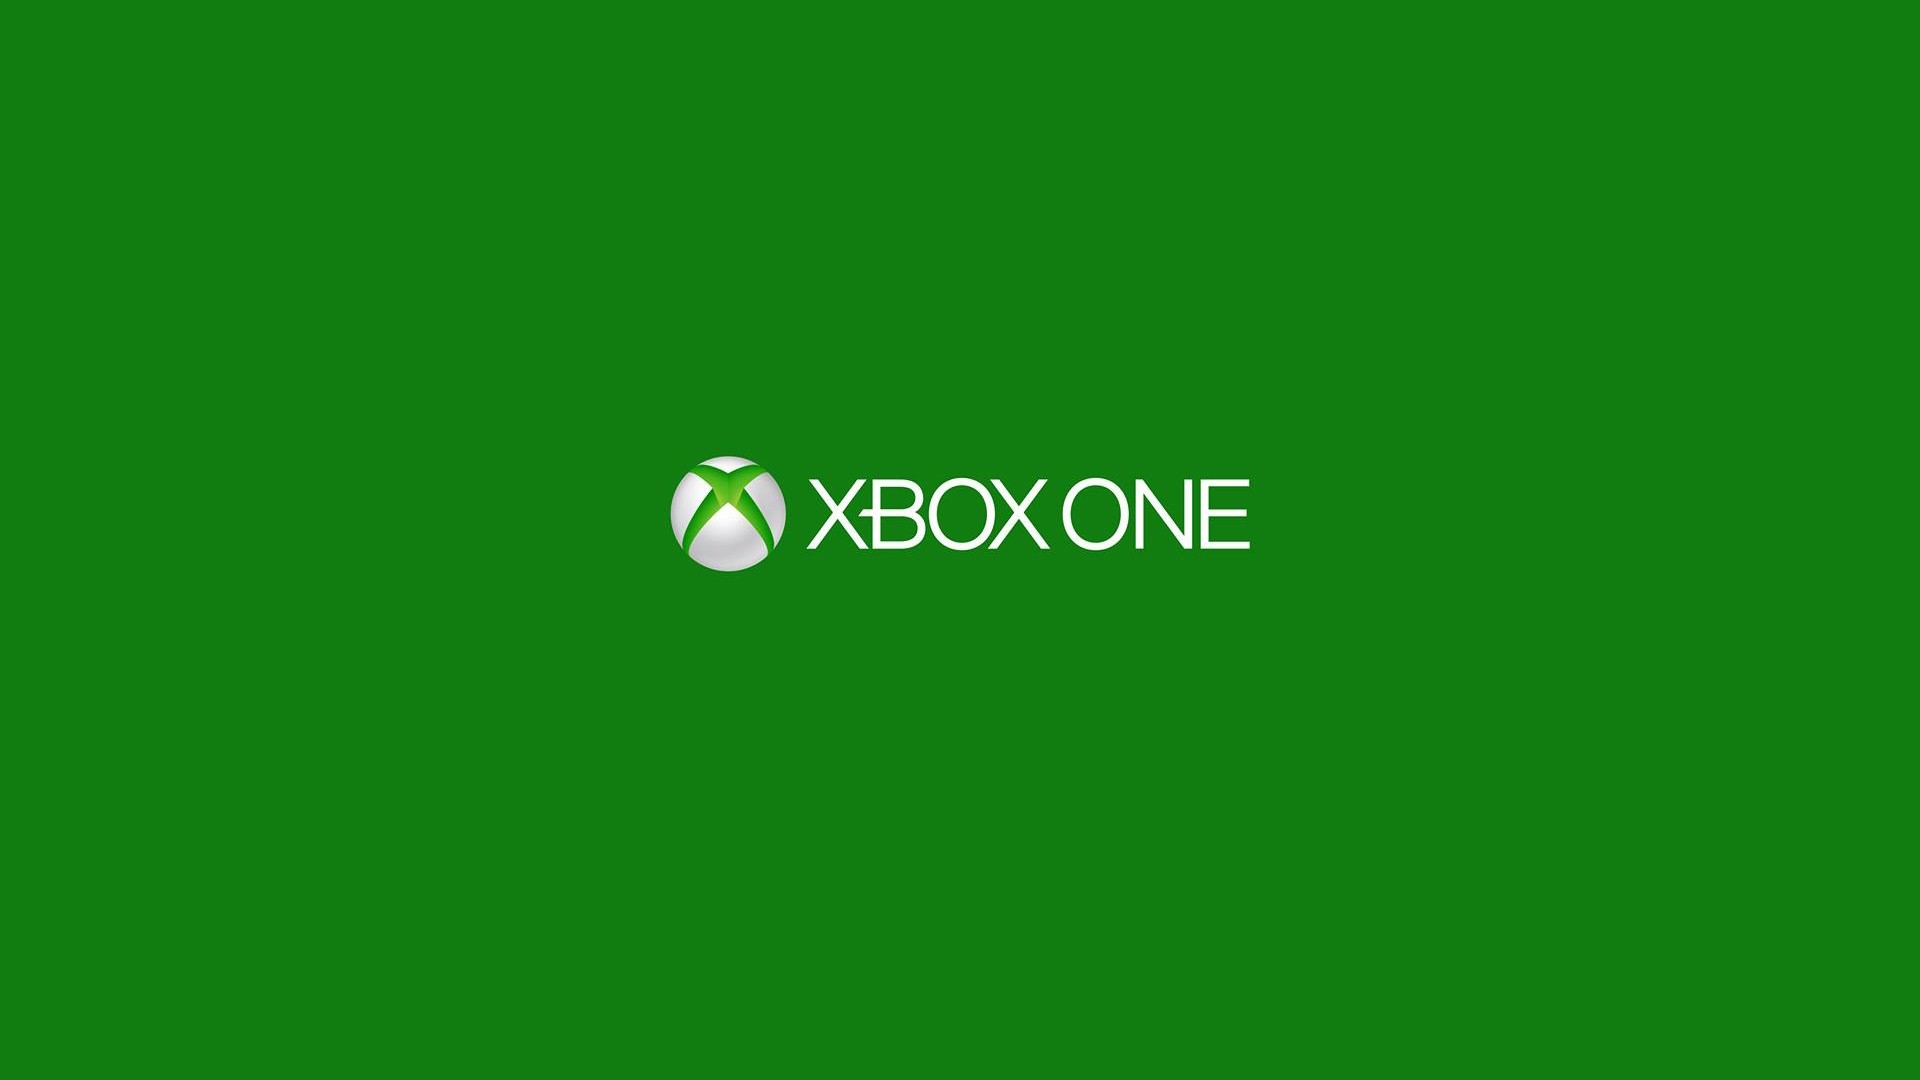 Xbox One Wallpaper Free Download